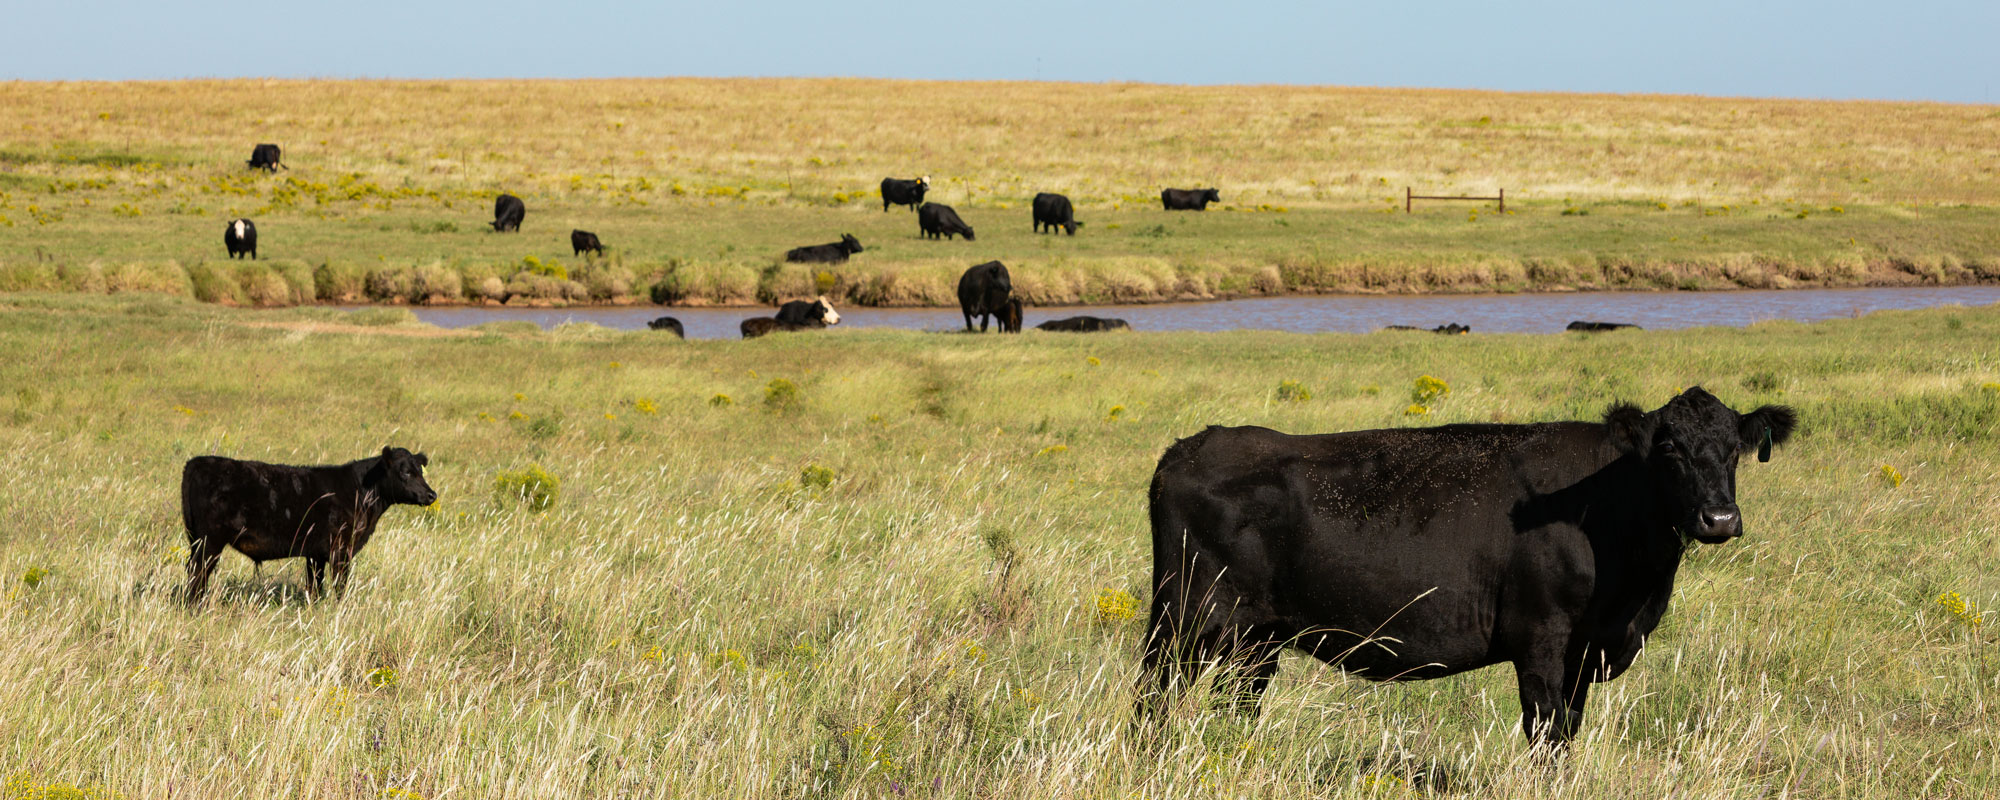 Cattle grazing in pasture near pond